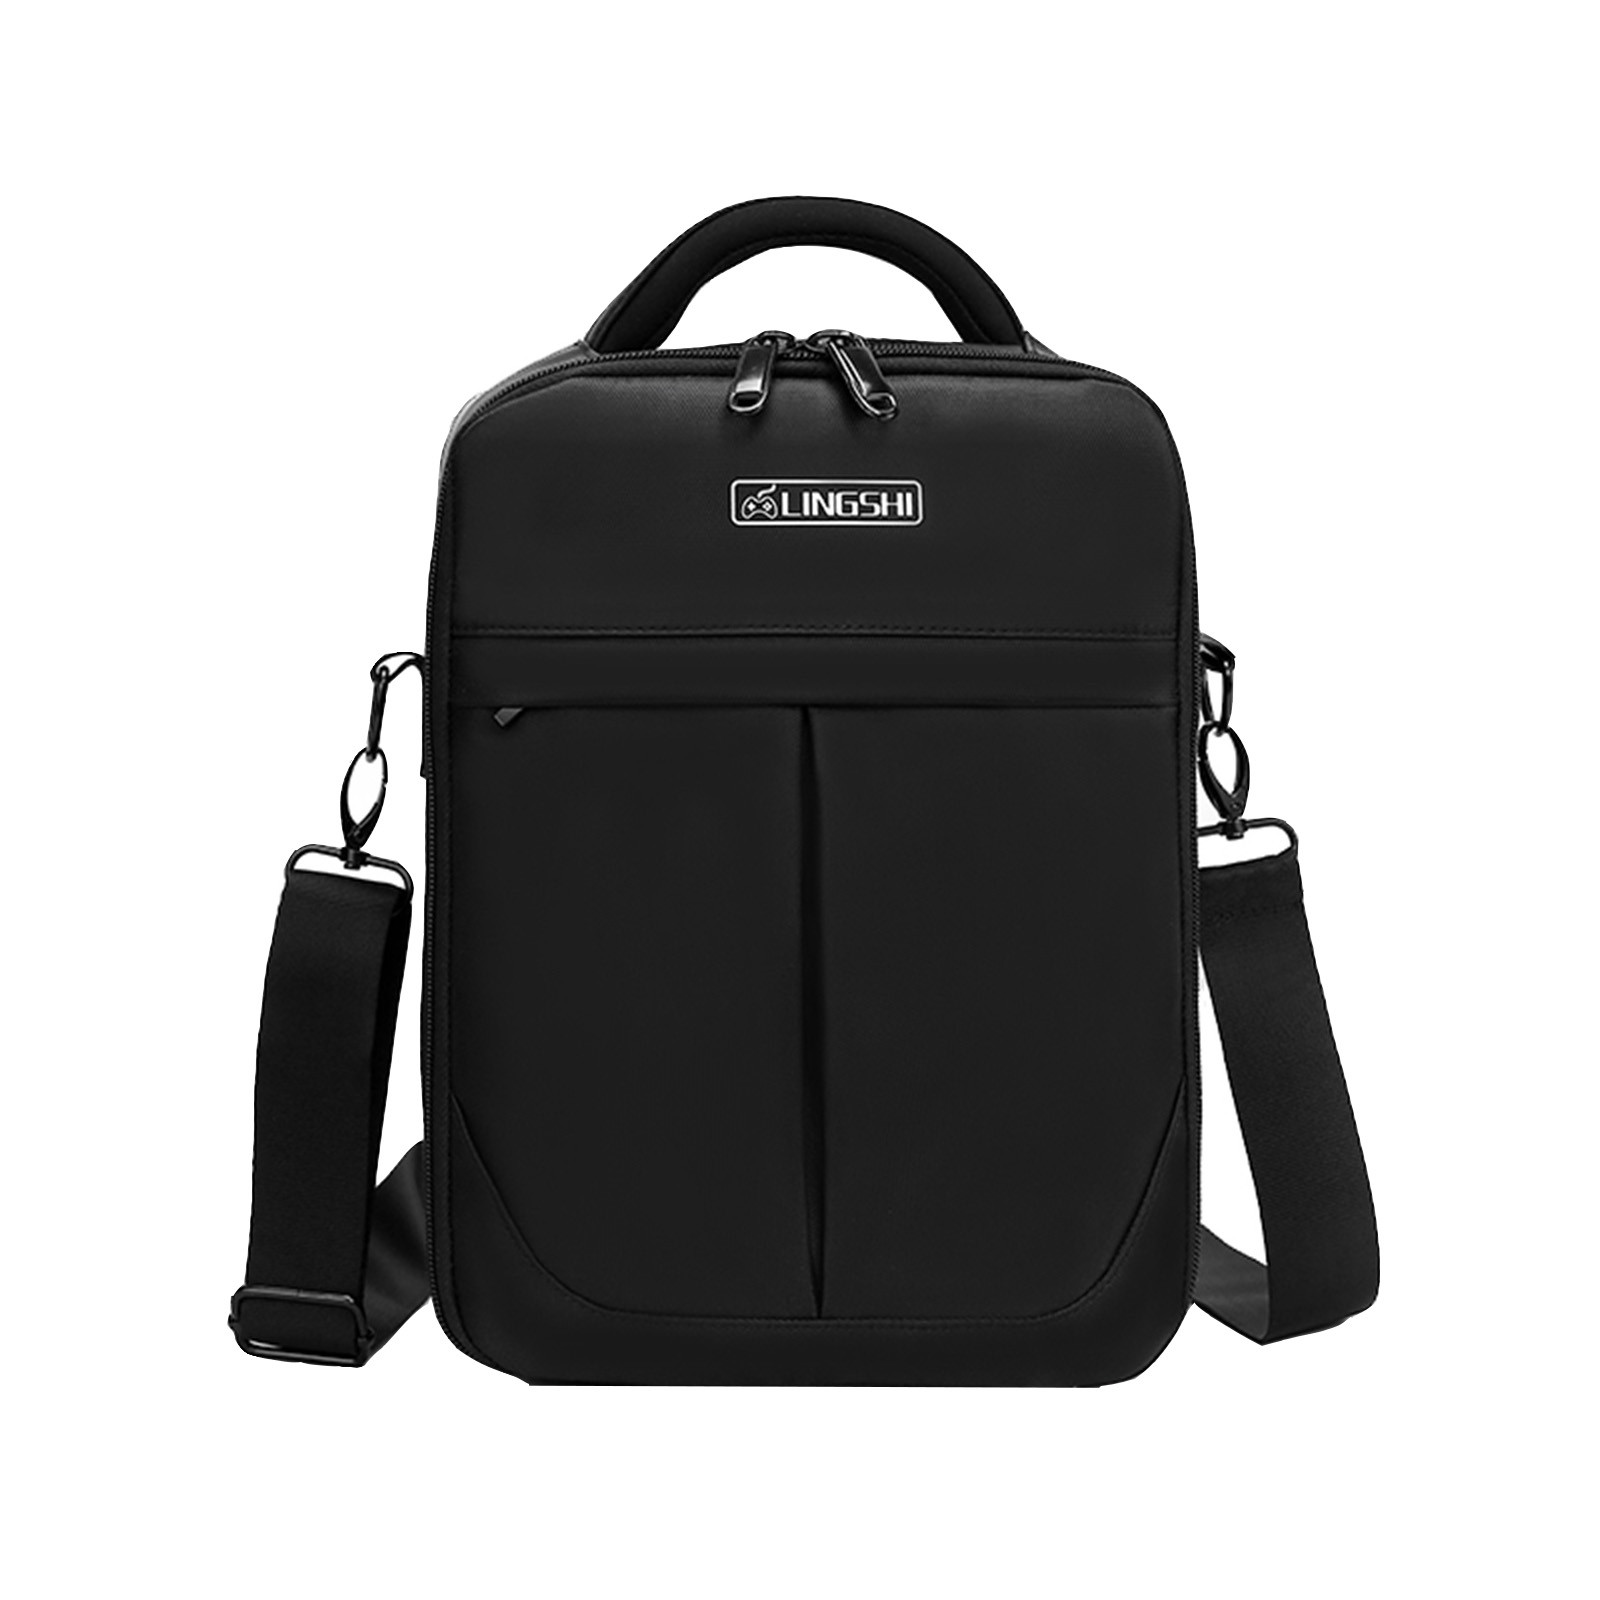 DJI AIR 2S Canvas Drone Backpack